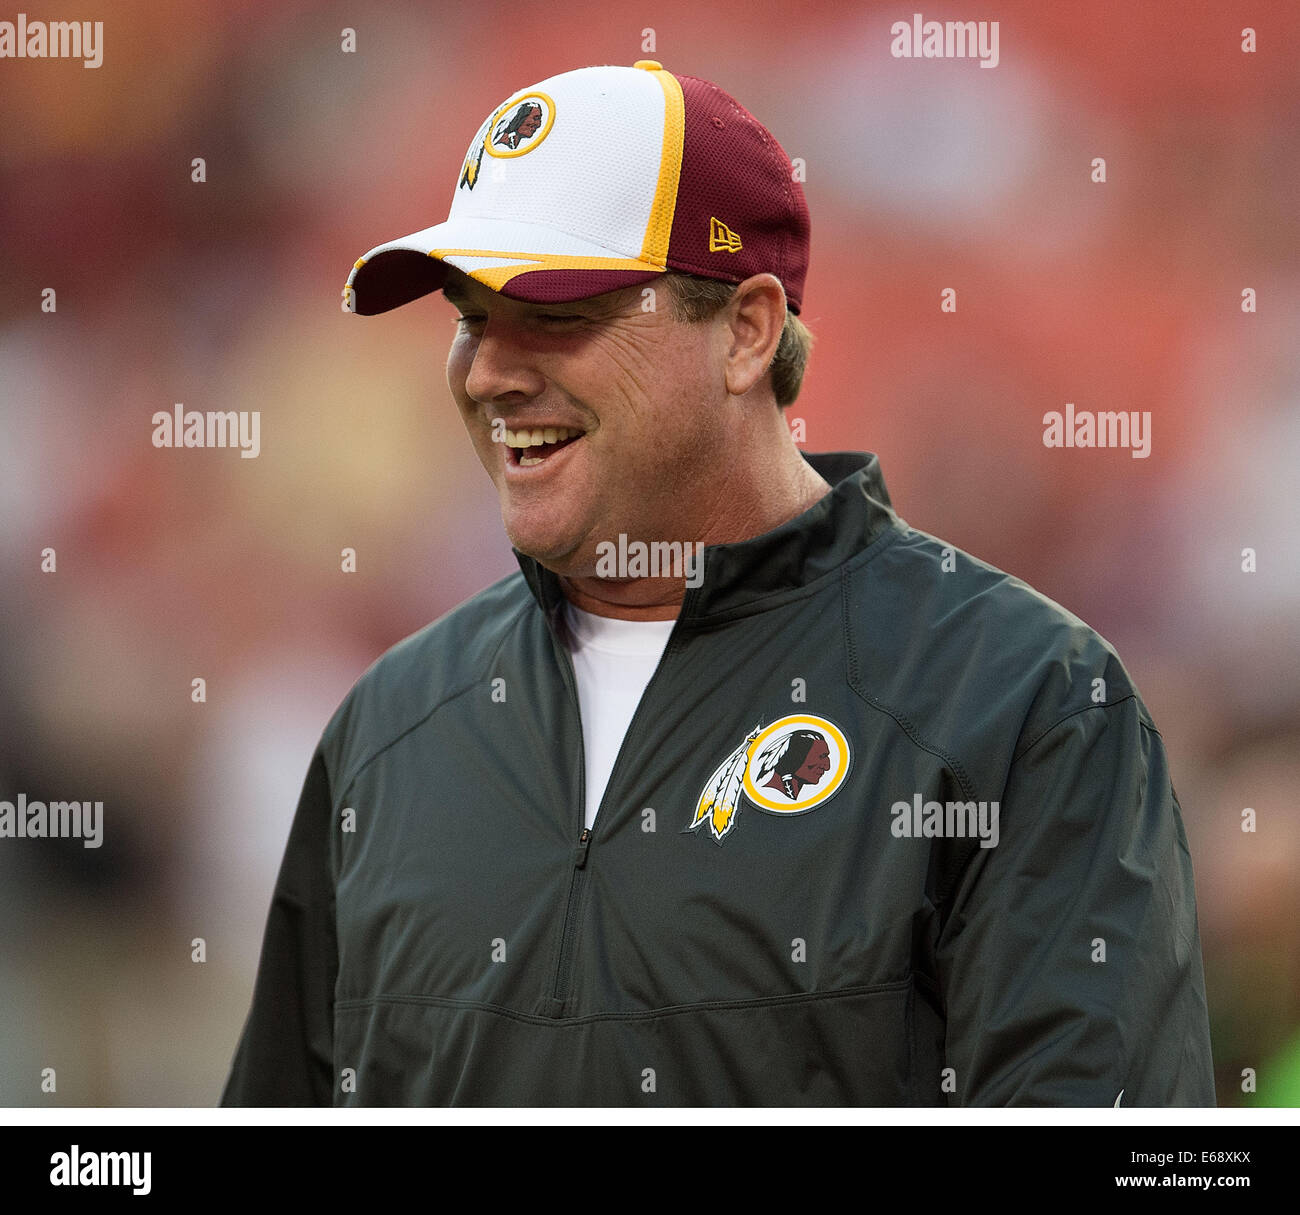 Washington, DC, USA. 18th Aug, 2014. Washington Redskins head coach Jay Gruden before the start of their preseason game against the Cleveland Browns at FedEx Field in Landover, MD Monday, August 18, 2014. © Harry E. Walker/ZUMA Wire/Alamy Live News Stock Photo